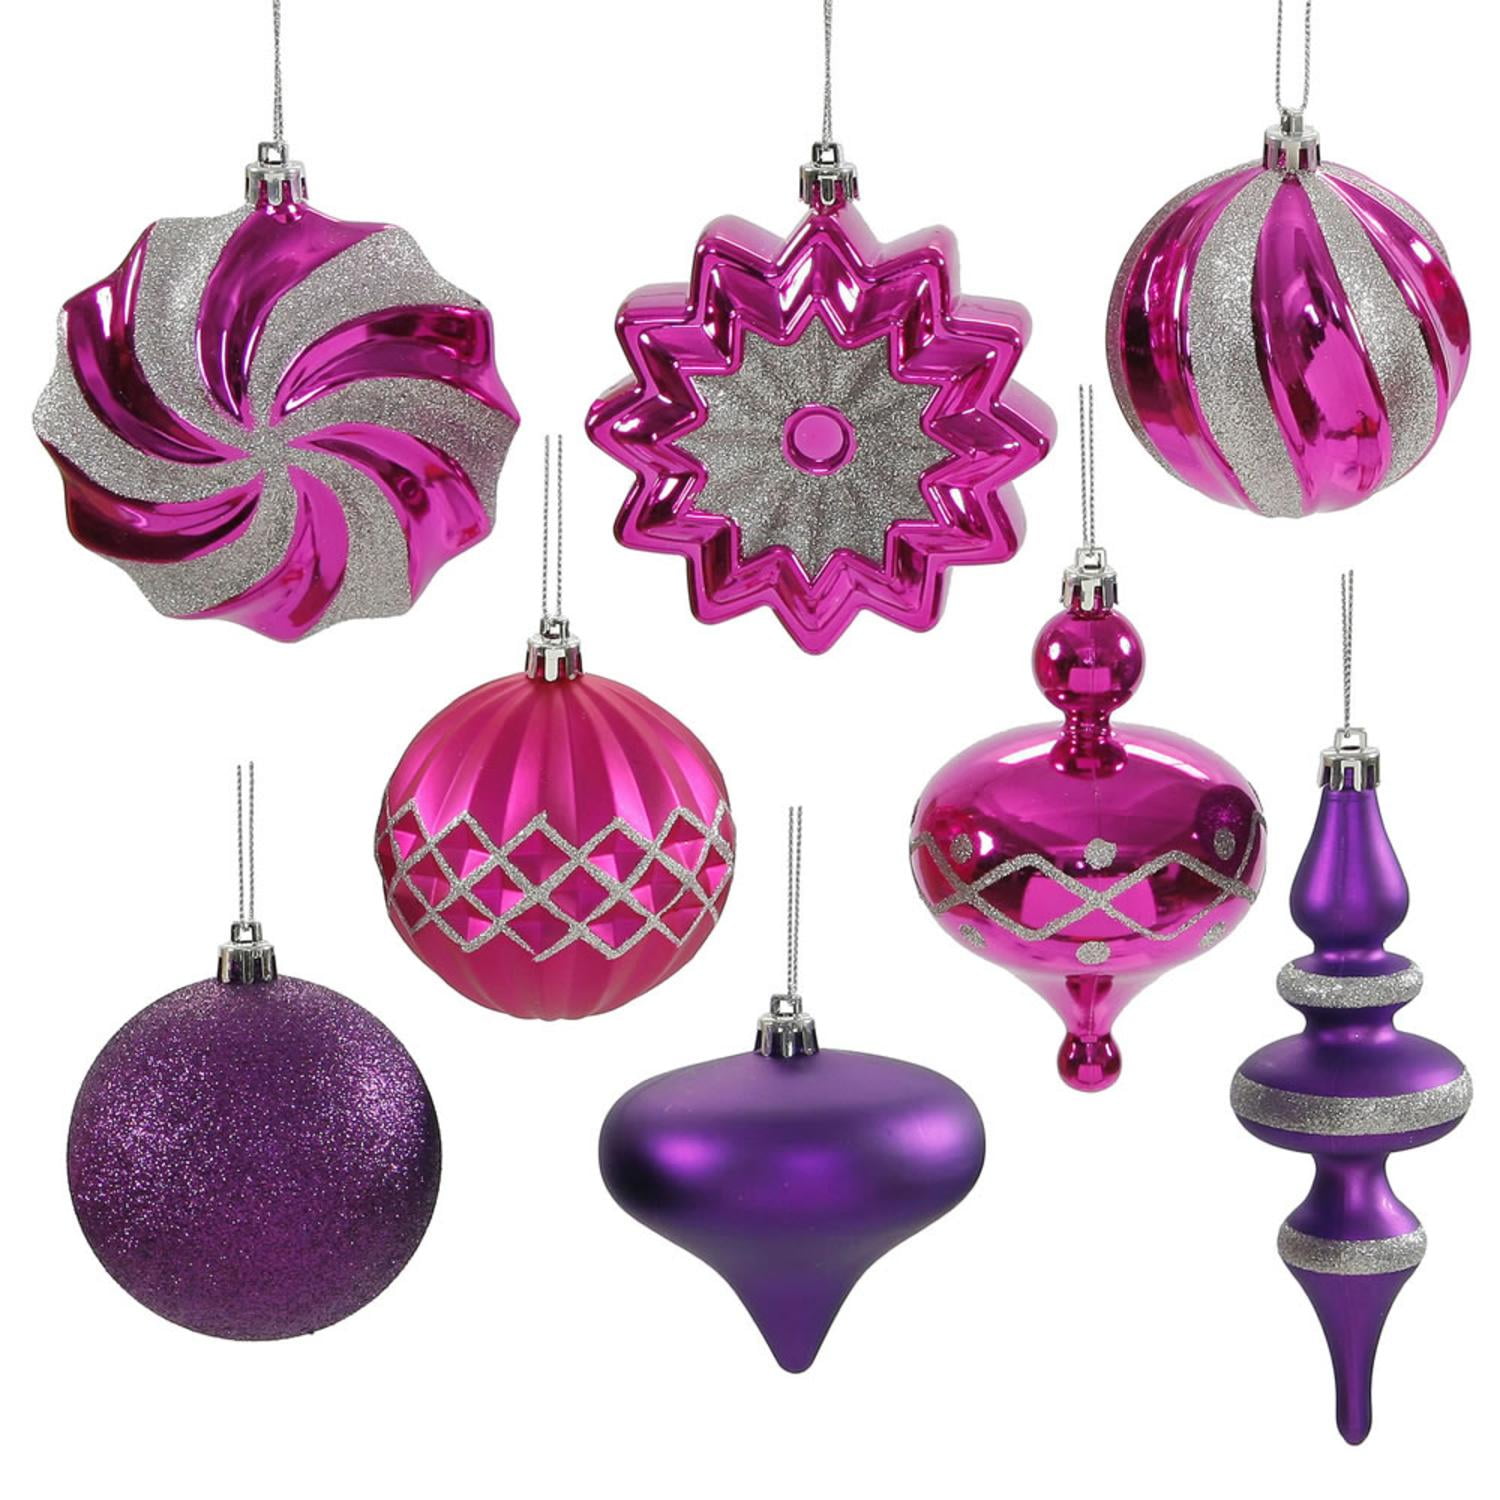 7 Northlight 8 Count Pink Transparent Spiral Shatterproof Christmas Finial Ornaments